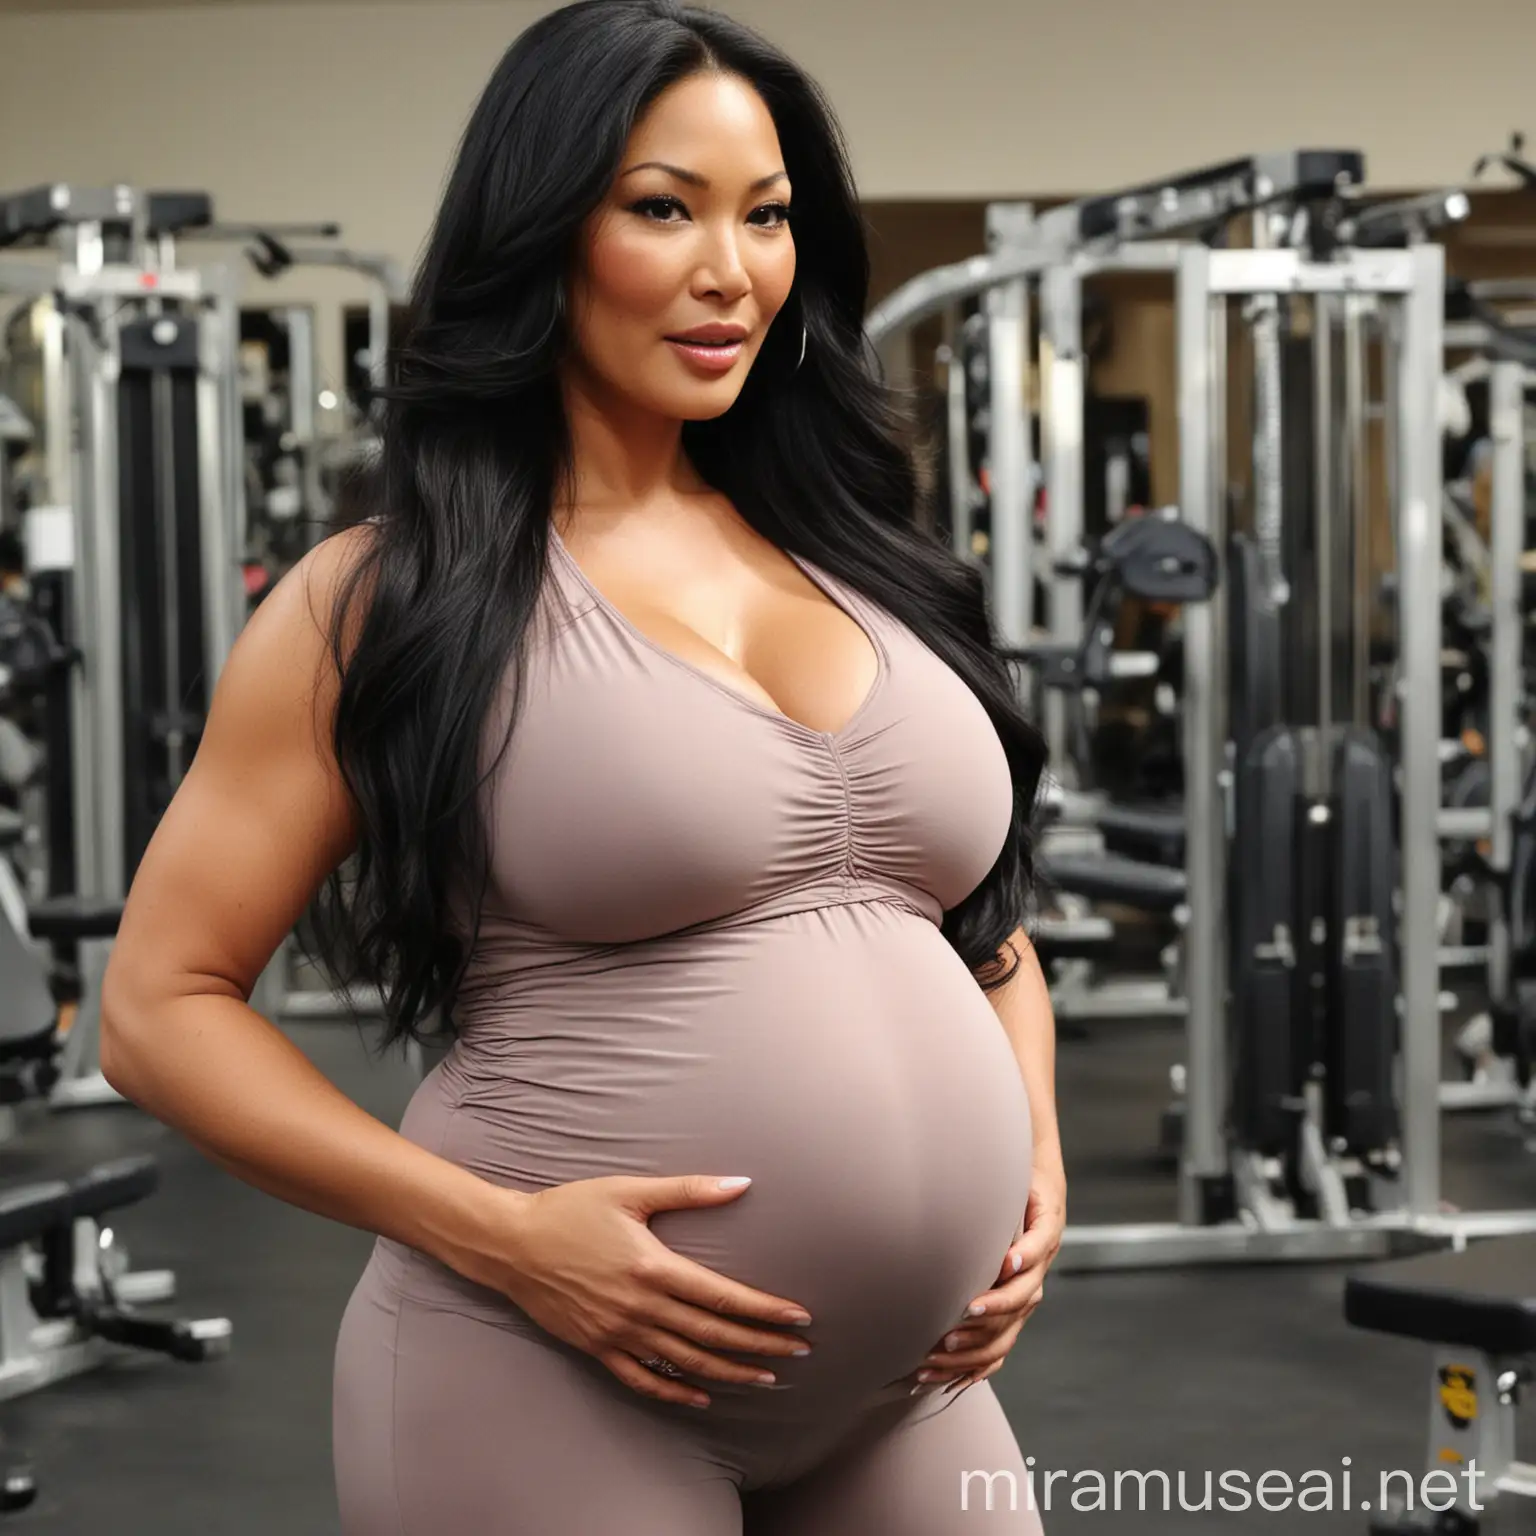 Kimora Lee Simmons in the gym, wearing a blouse, nine months pregnant, long straight hair, big huge massive pregnant belly, giant breasts, zoomed in close from the waist up
